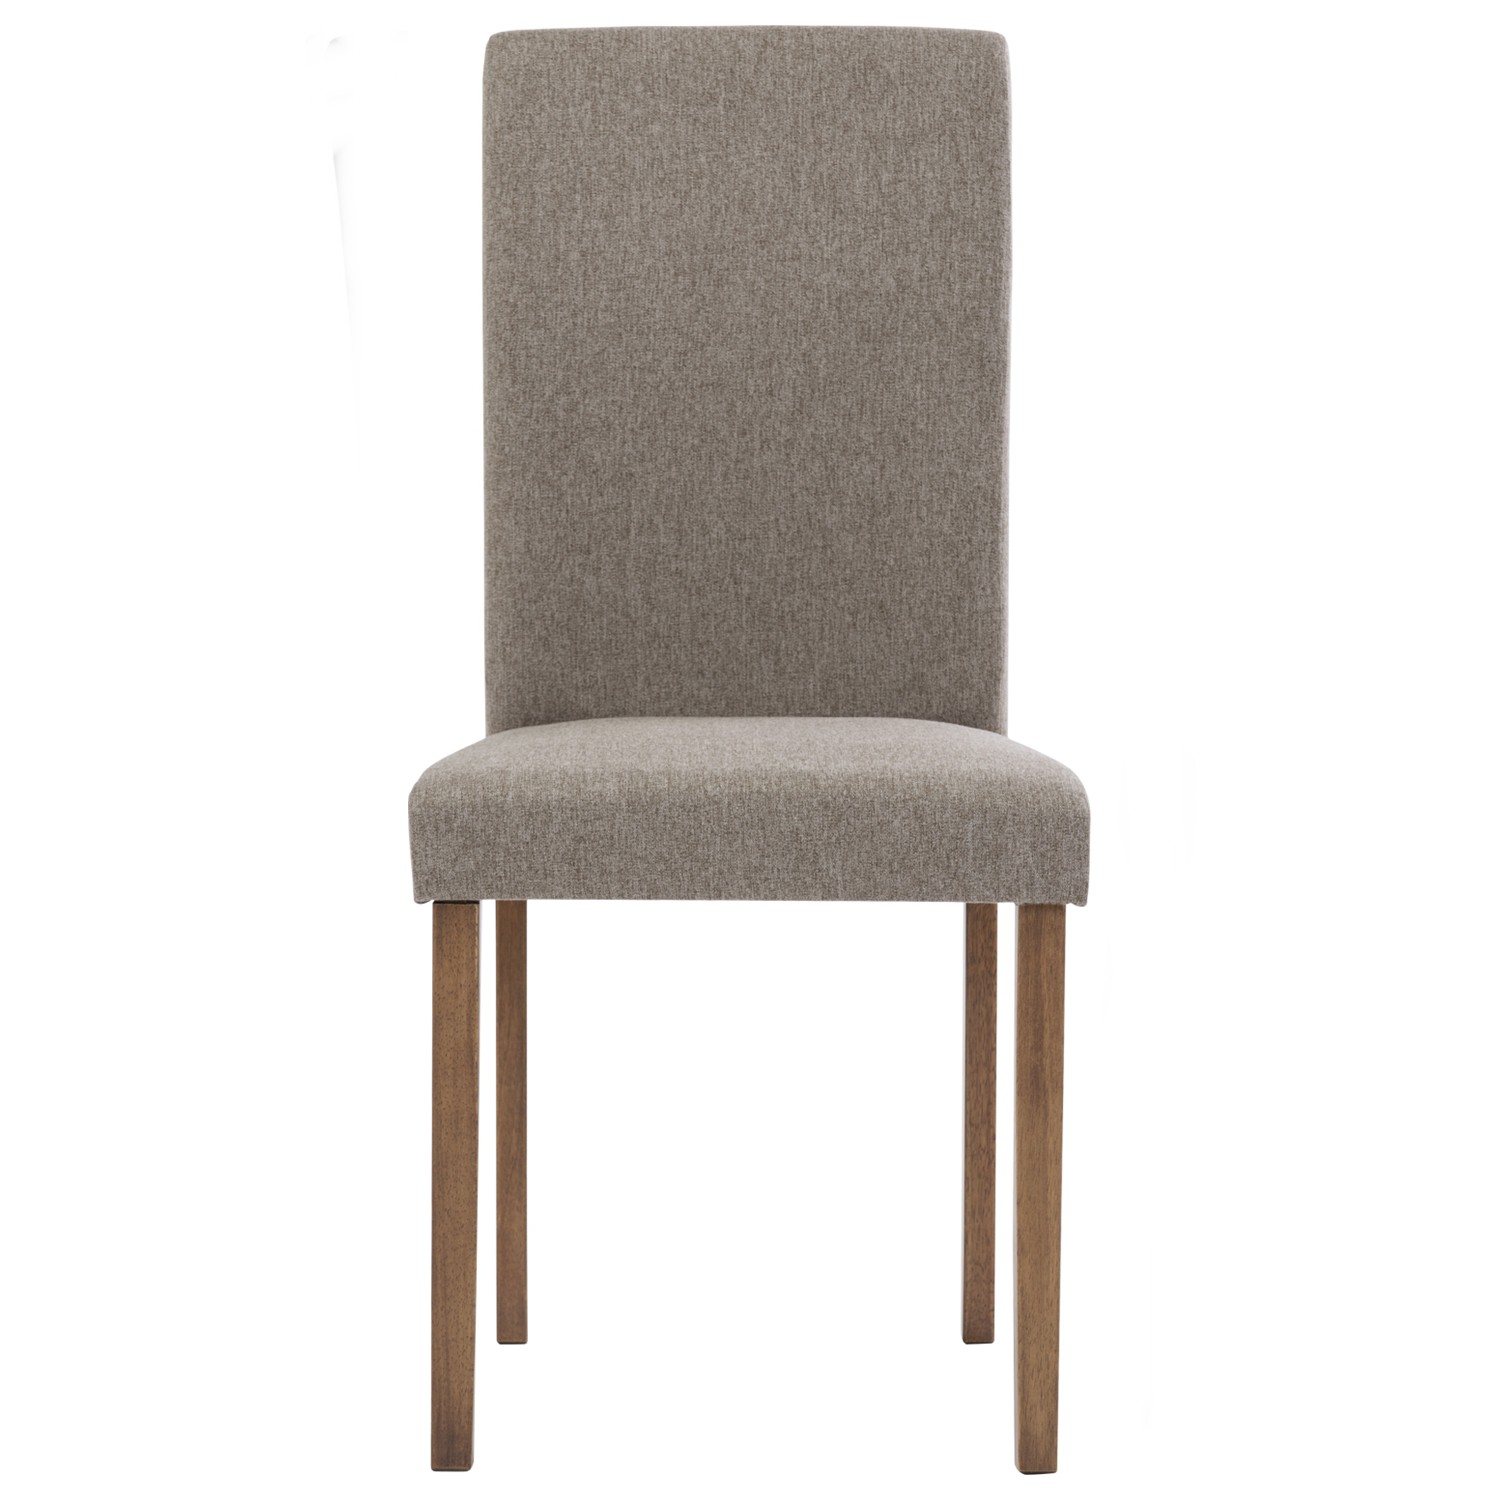 LENORE DINING CHAIR 109/6513